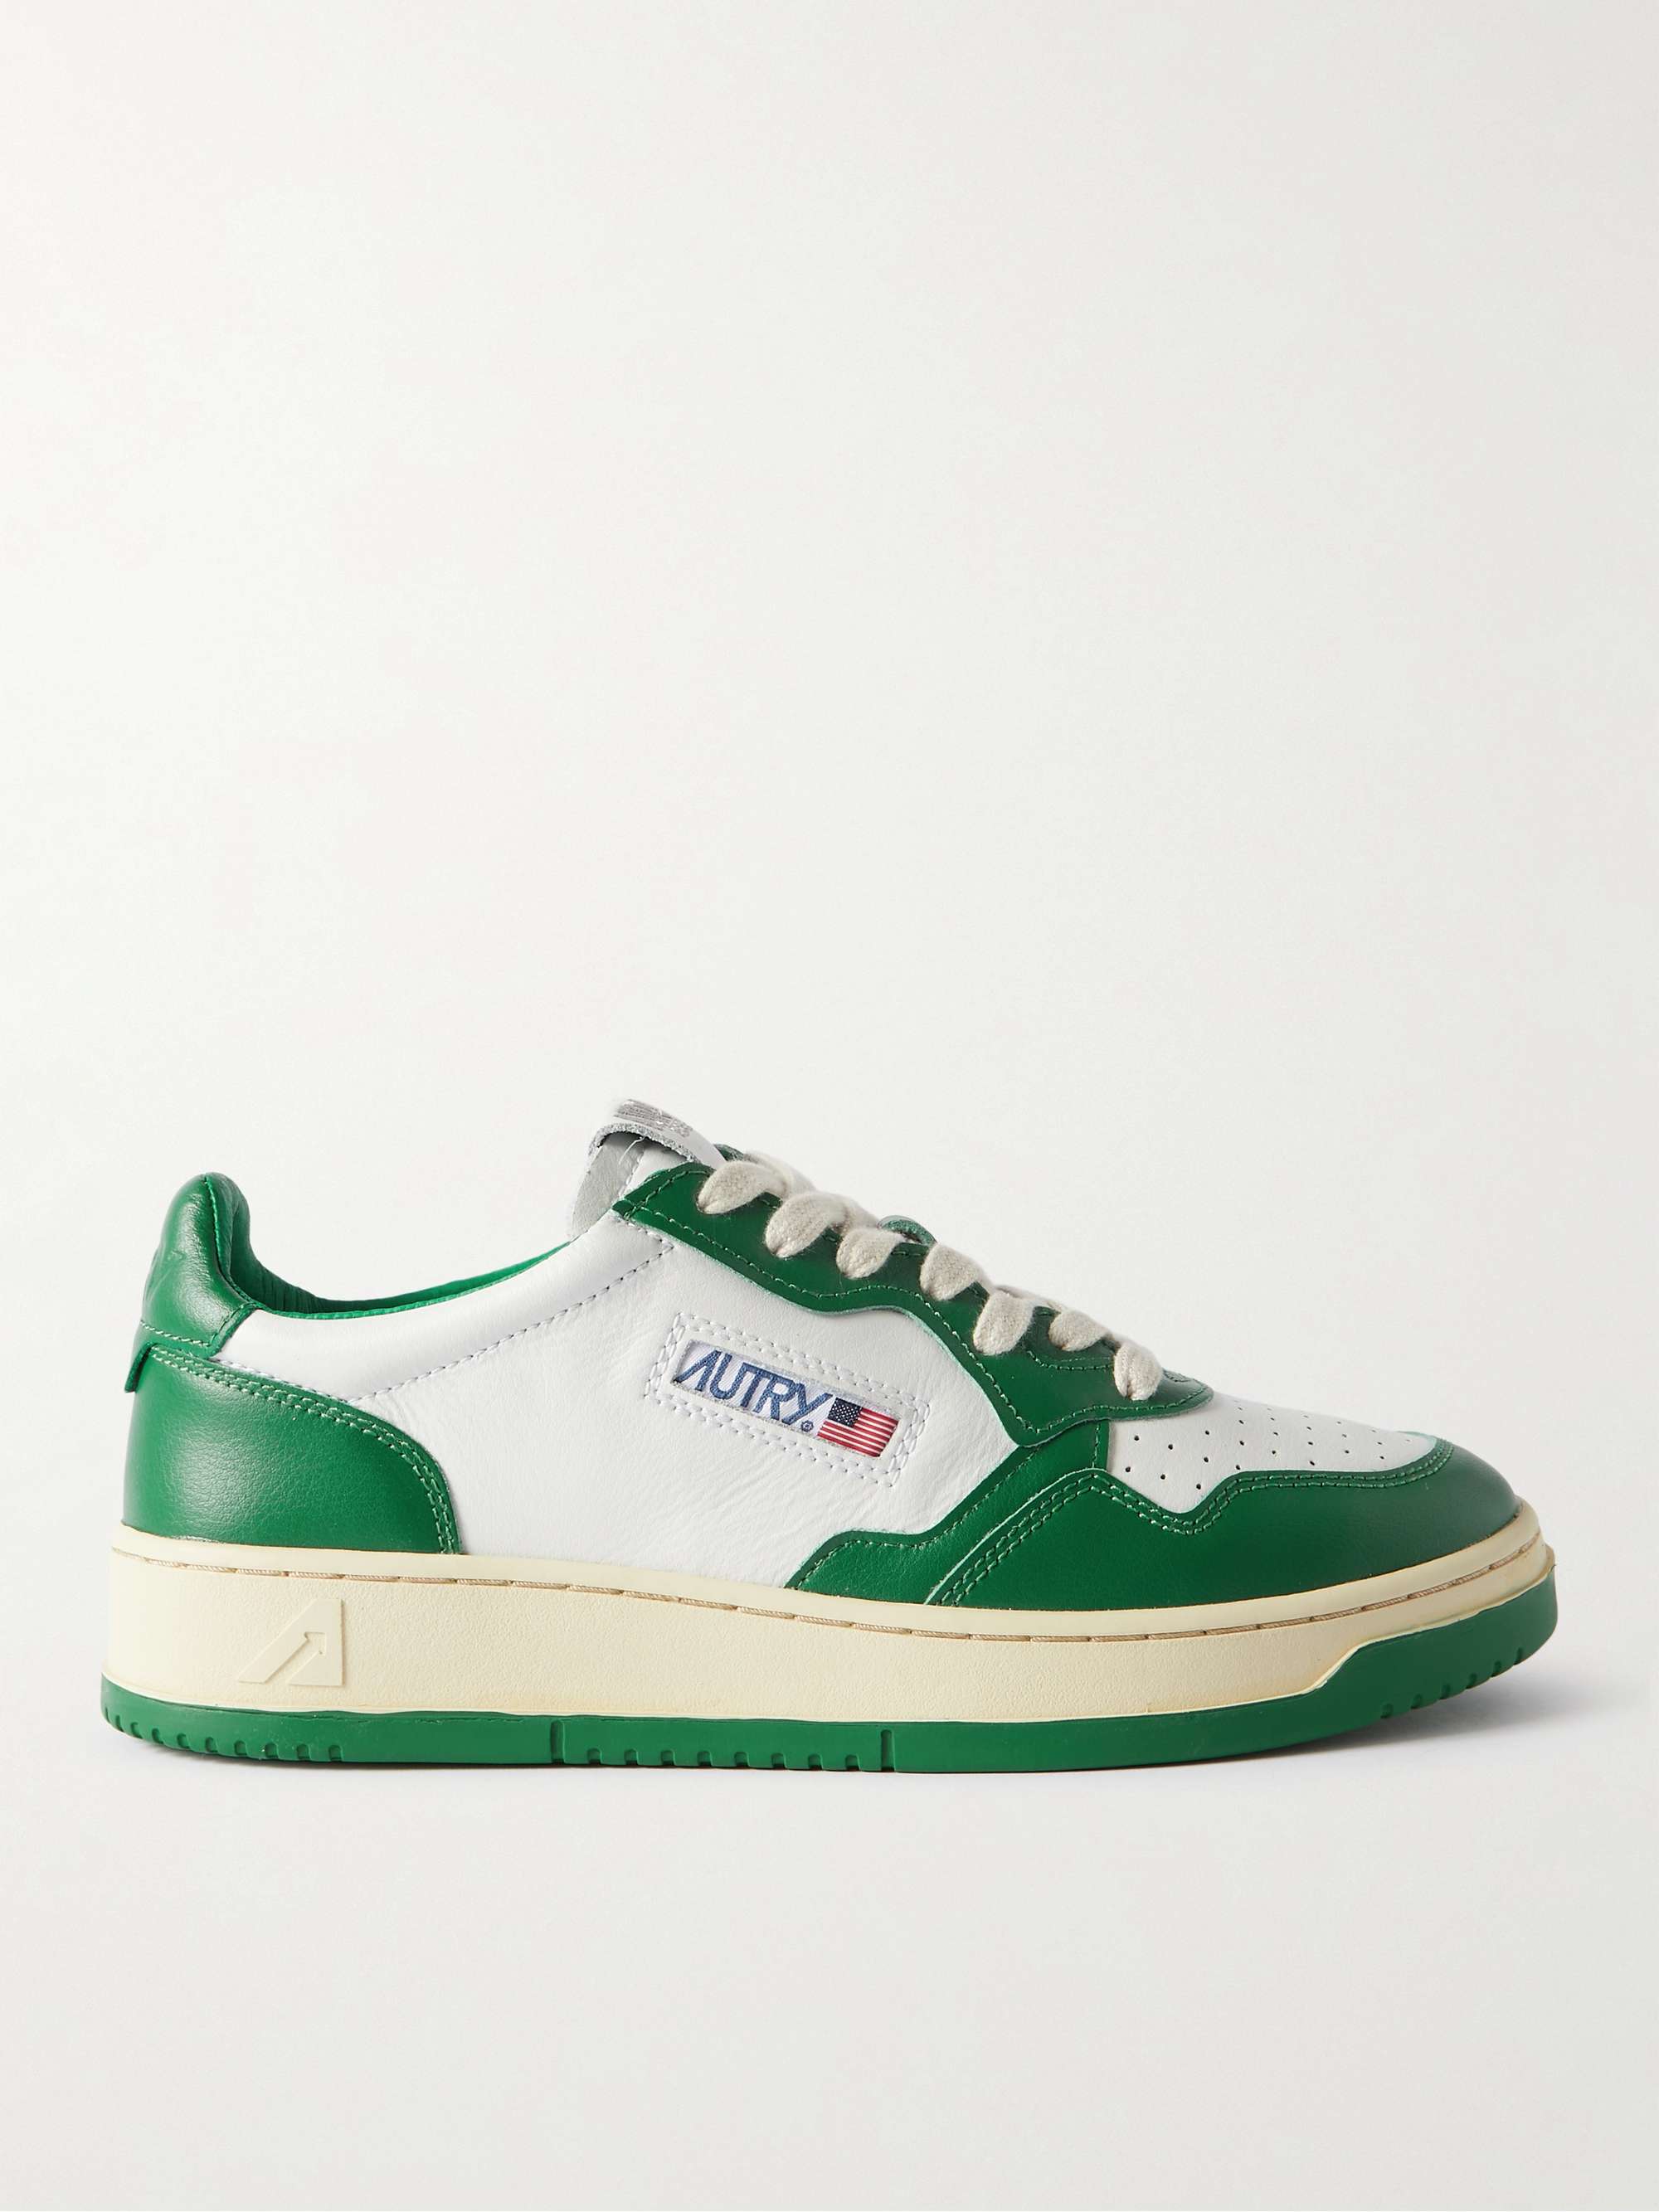 AUTRY Medalist Two-Tone Leather Sneakers